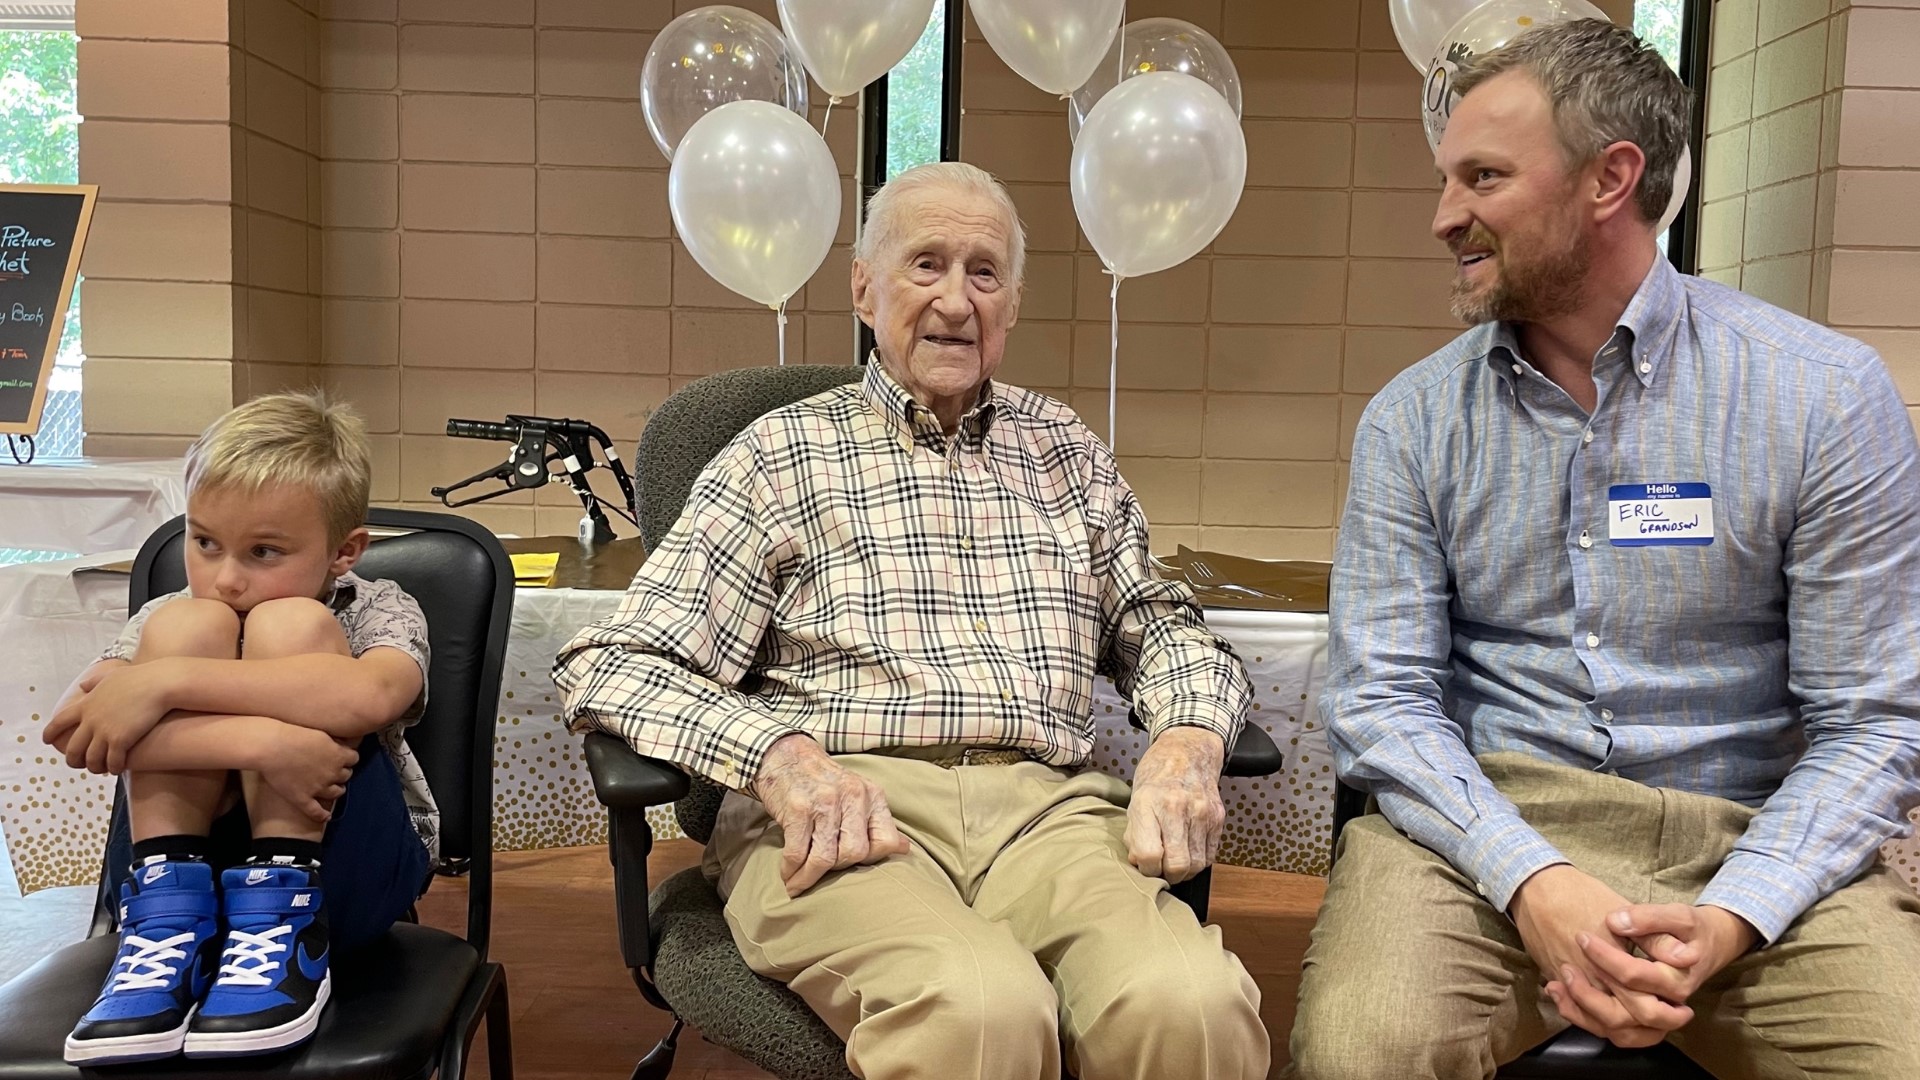 Chester "Chet" Nordling, a WWII Veteran, celebrated his 100th birthday in Rogers.